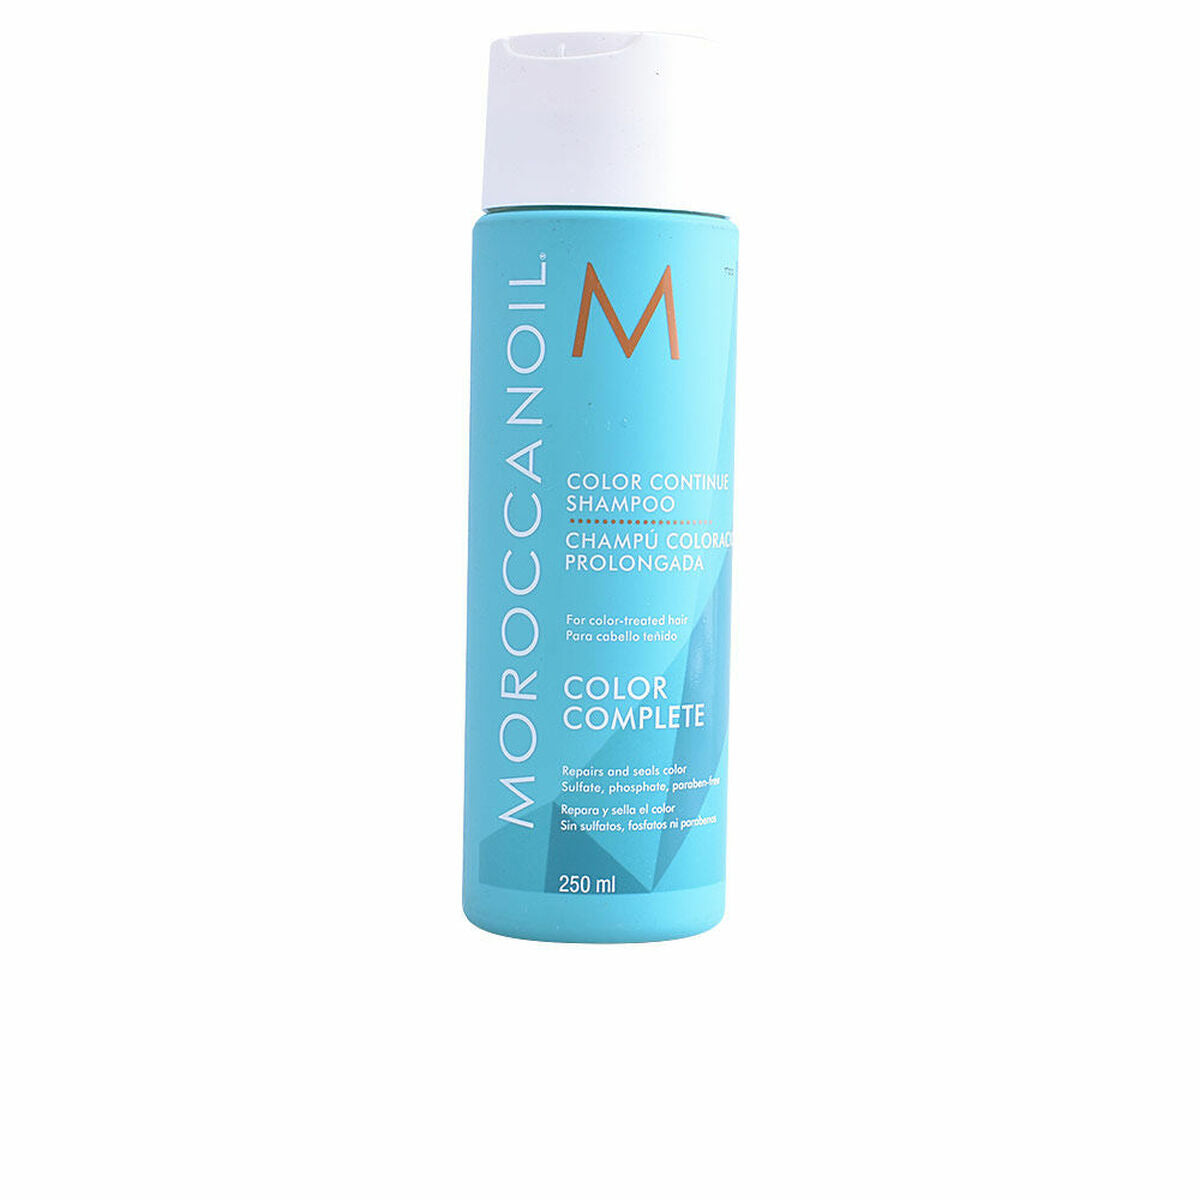 Shampoing Complet Moroccanoil Color Complete 250 ml (250 ml)